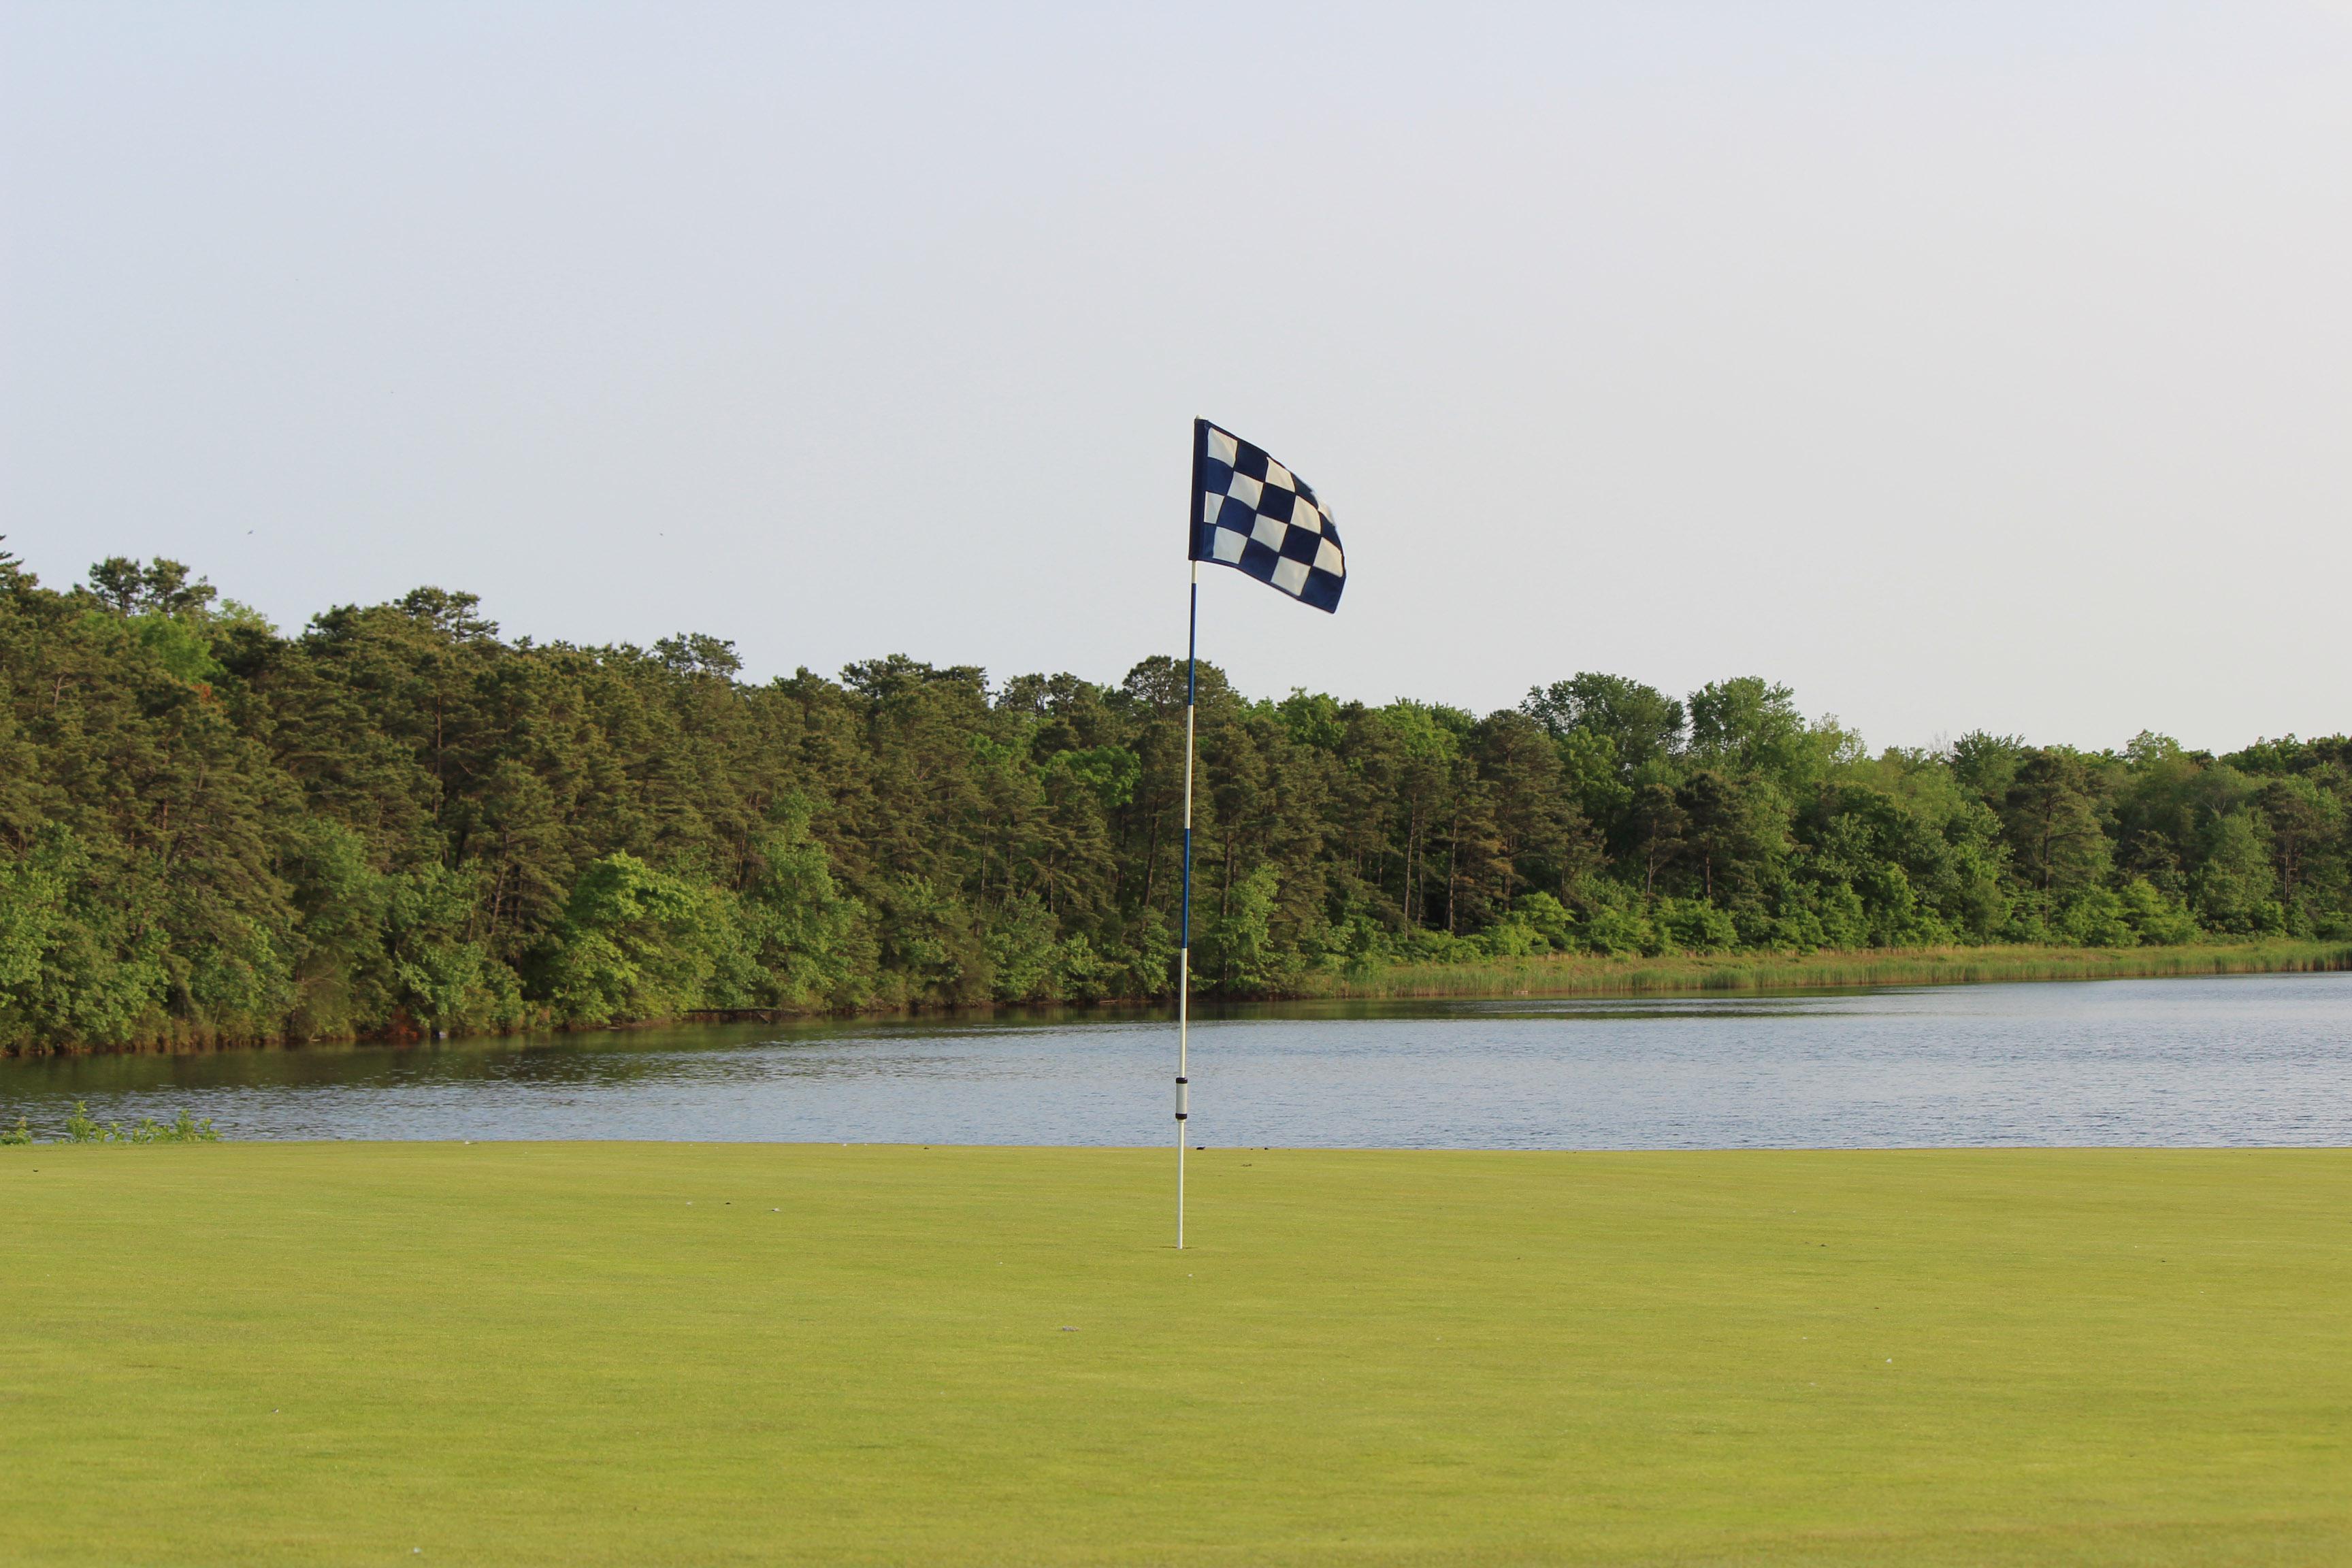 10th Green at Ocean Acres Country Club. In the foreground, is a blue and white checkered flag. Beyond the green is Holiday Lake that is bordered by large and dense trees, mostly pine trees.